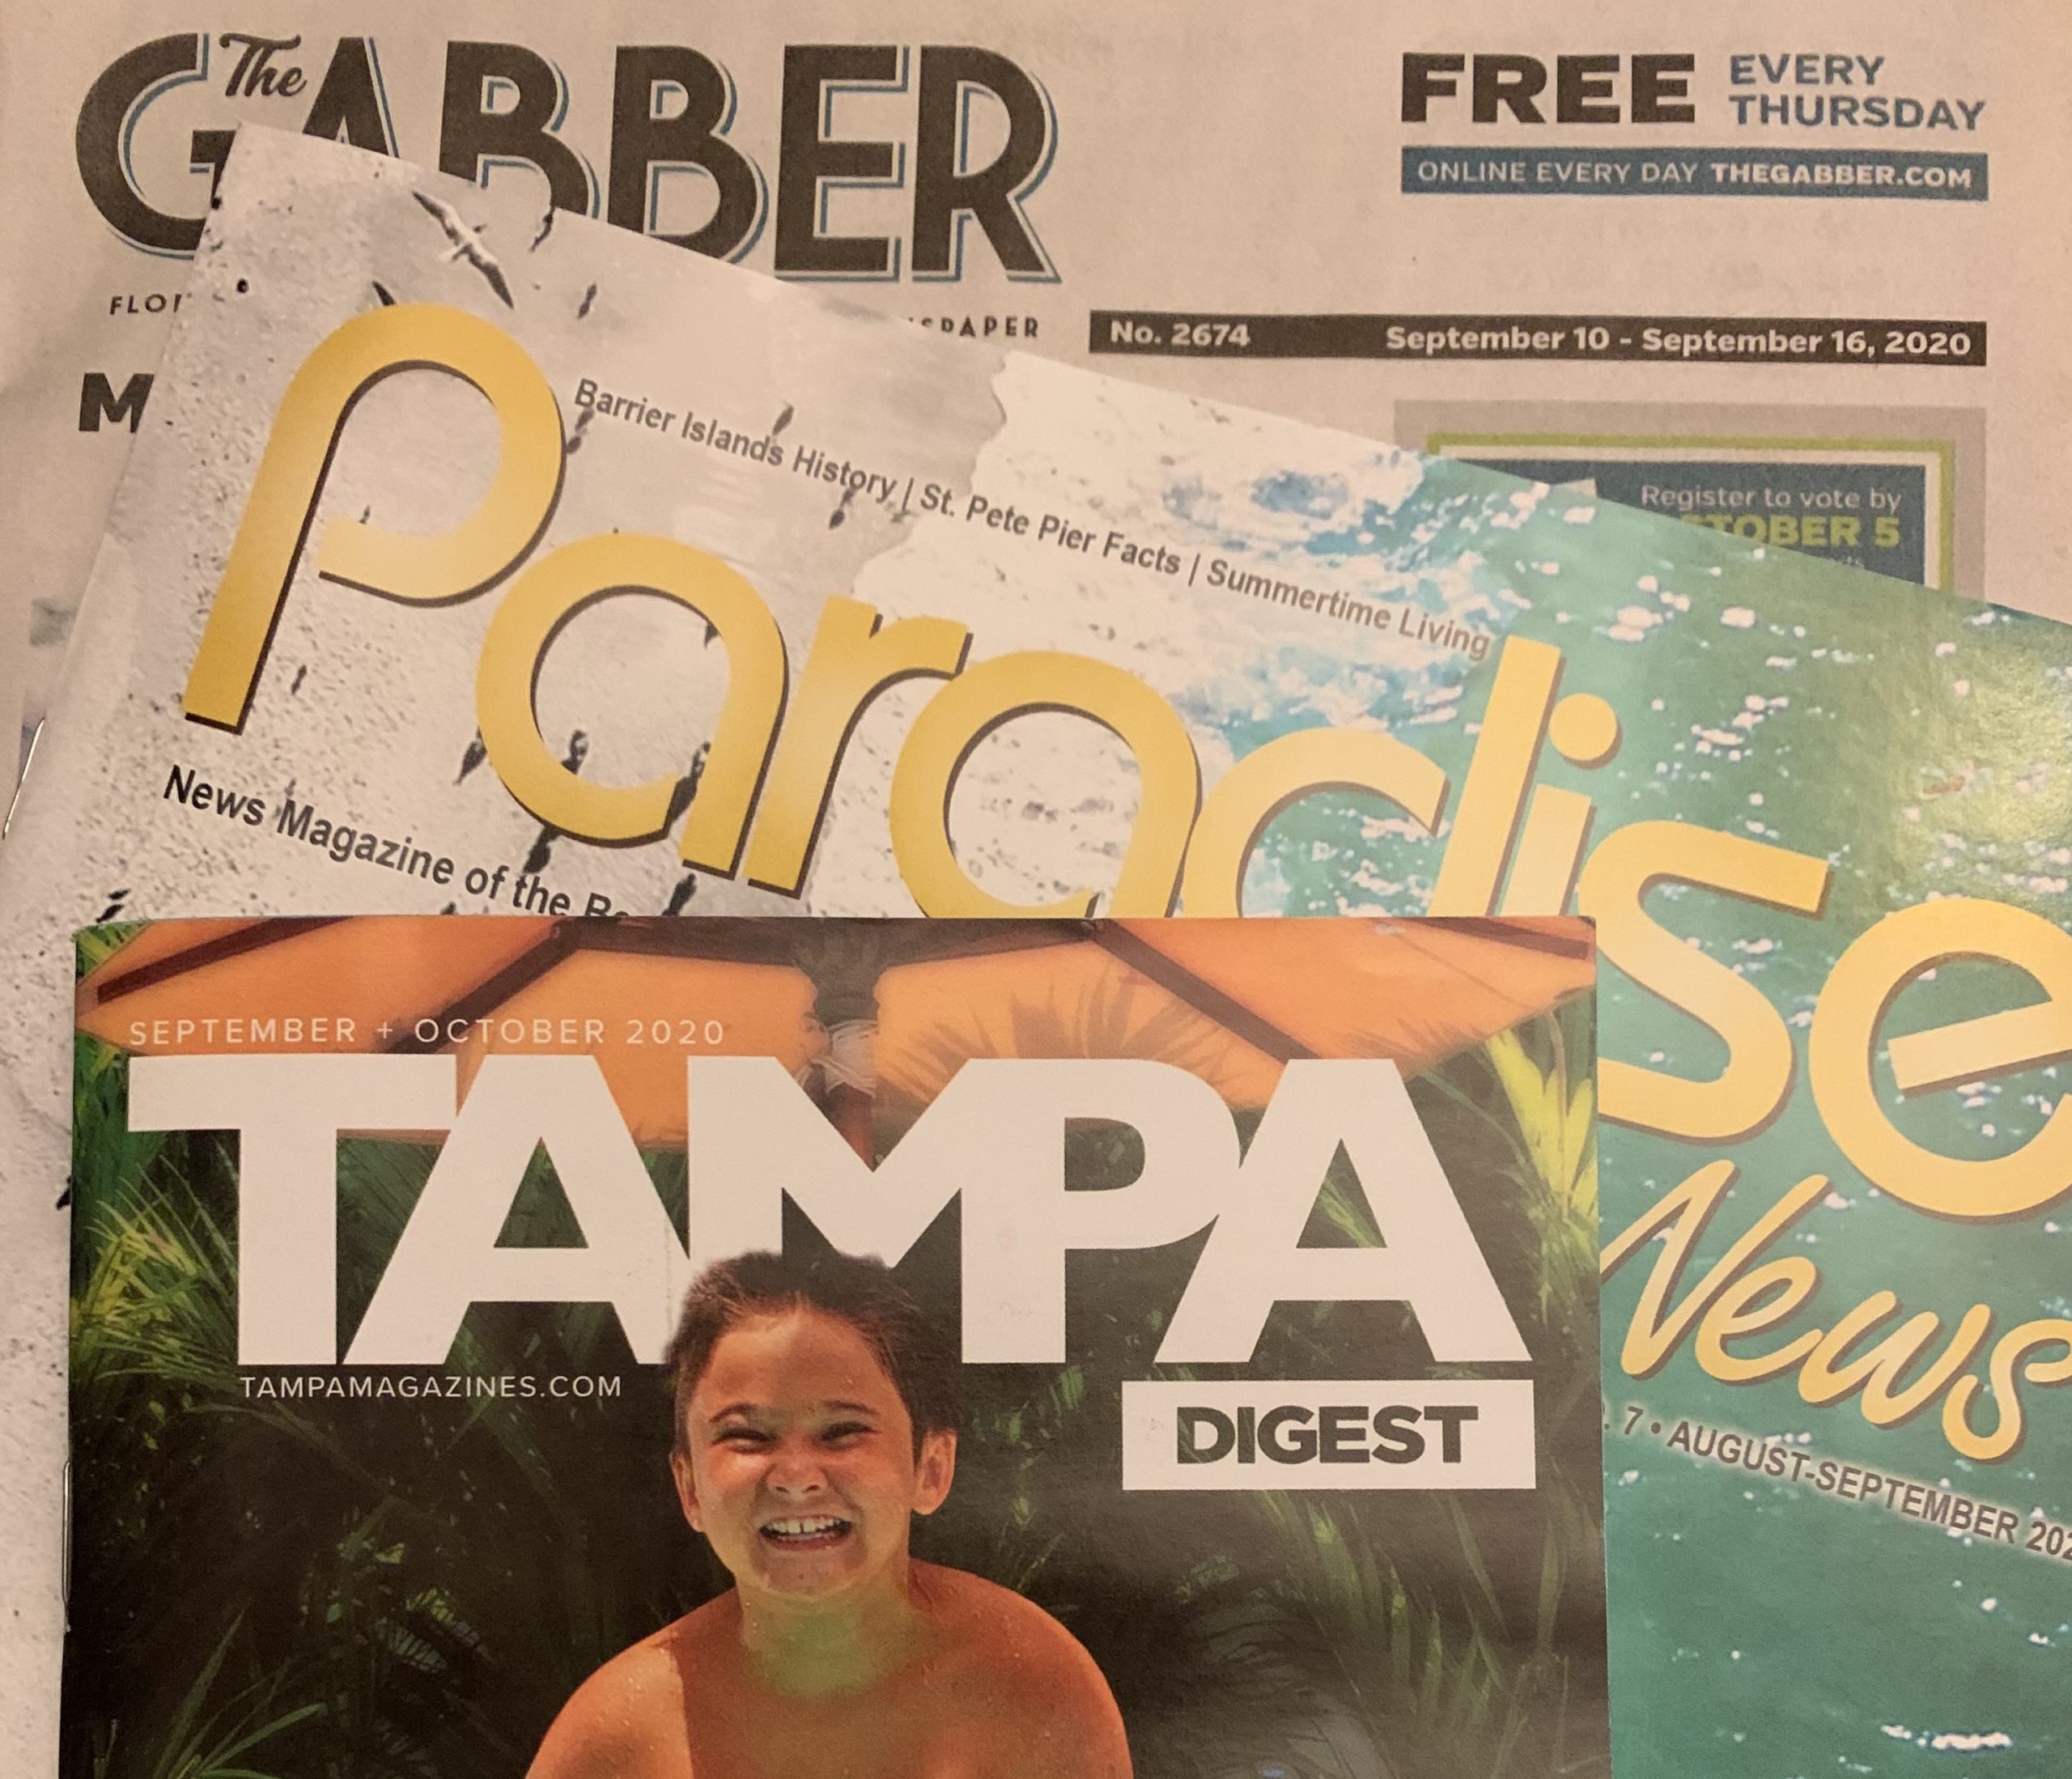 Tampa Bay community news publications